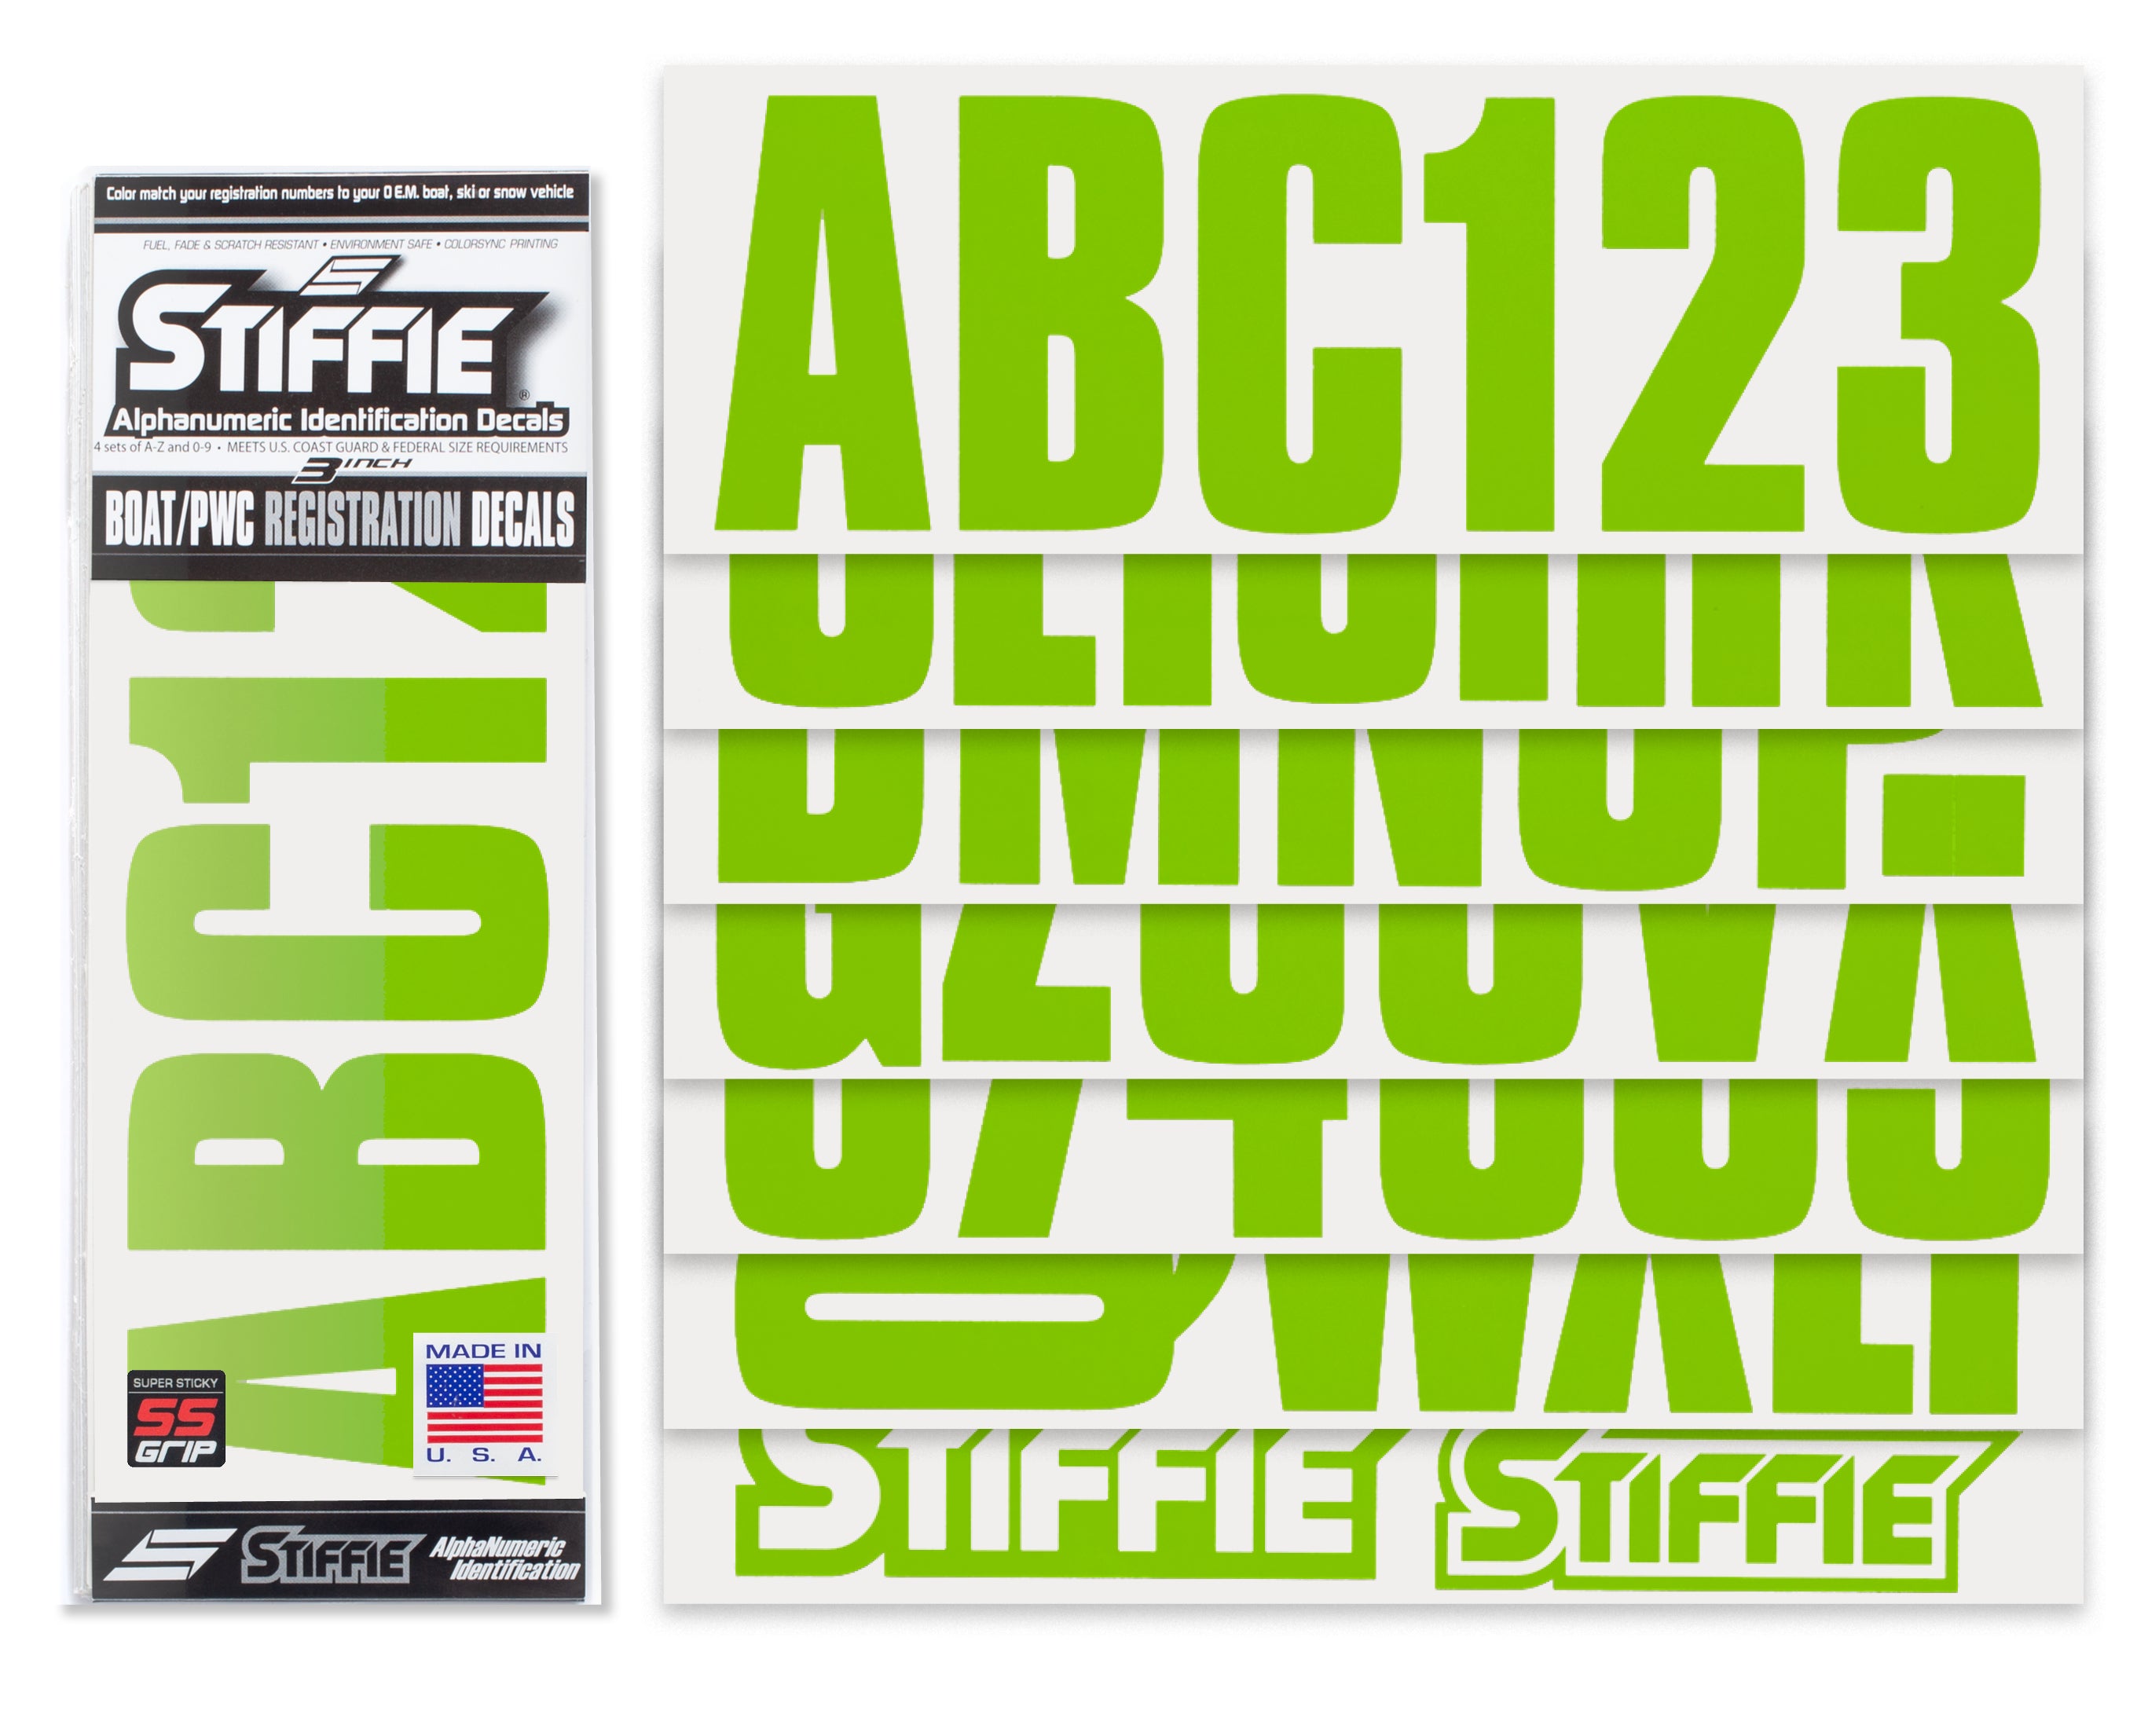 STIFFIE Uniline Team Green Super Sticky 3" Alpha Numeric Registration Identification Numbers Stickers Decals for Sea-Doo Spark, Inflatable Boats, Ribs, Hypalon/PVC, PWC and Boats